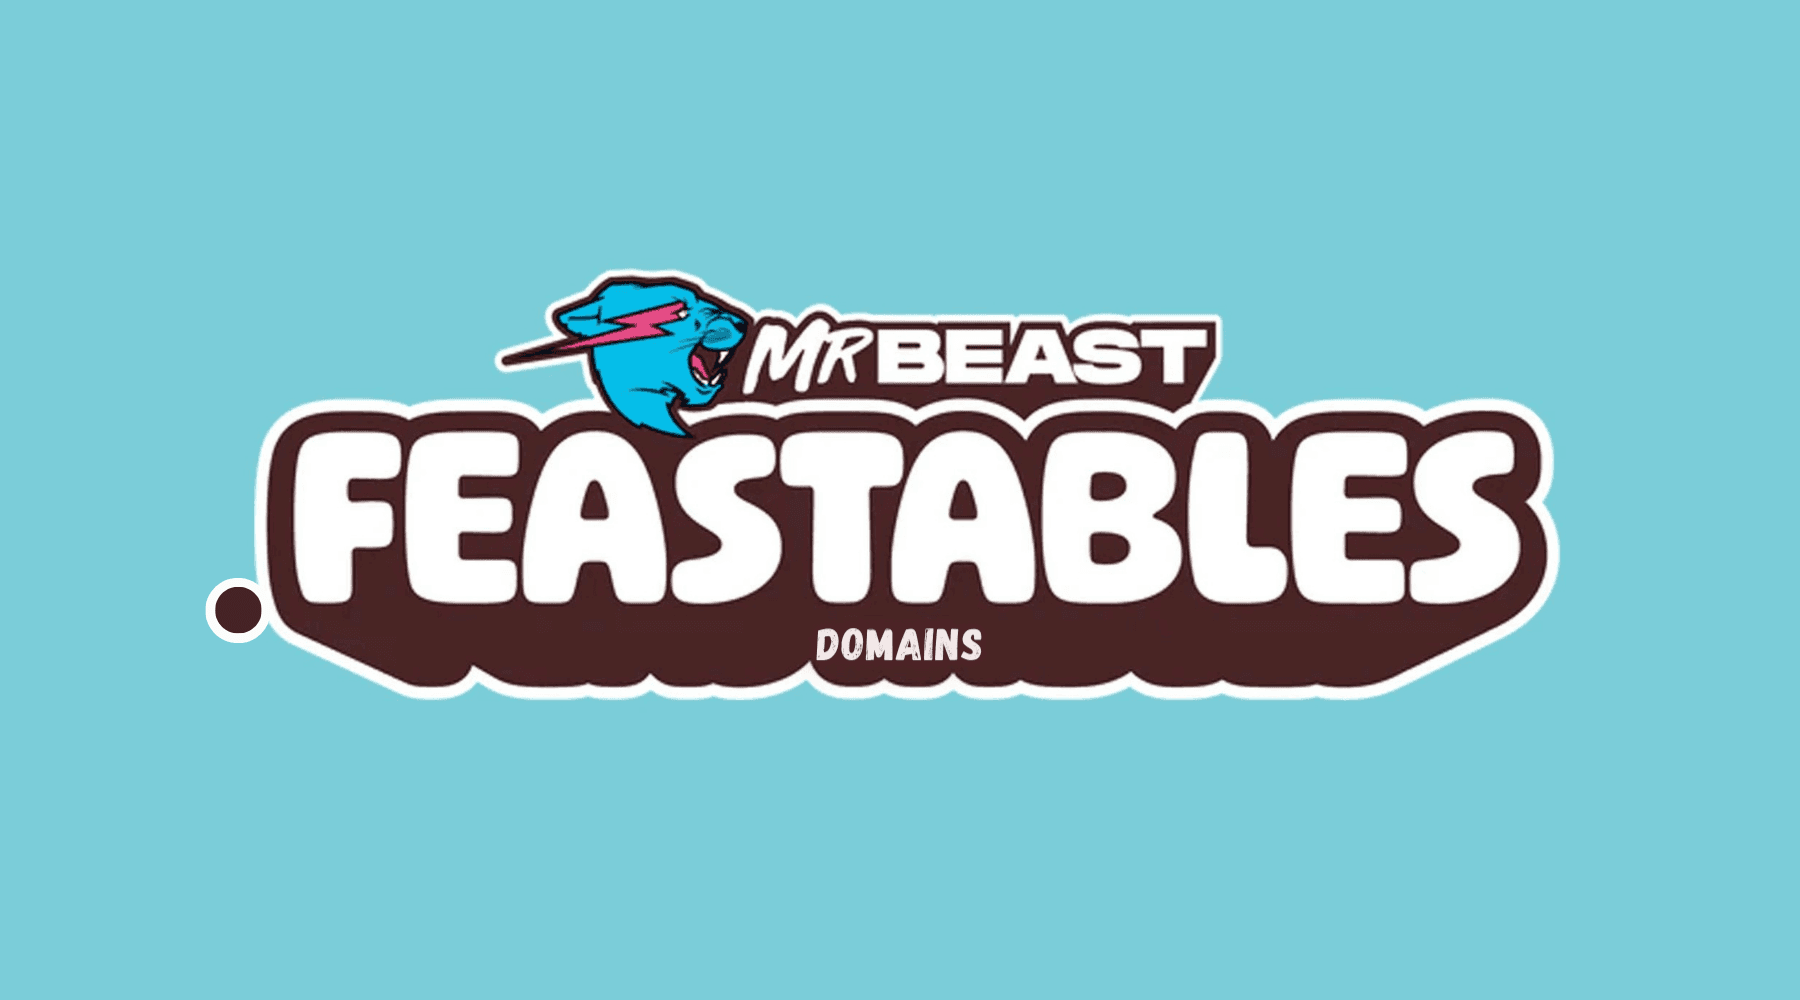 feastables background image